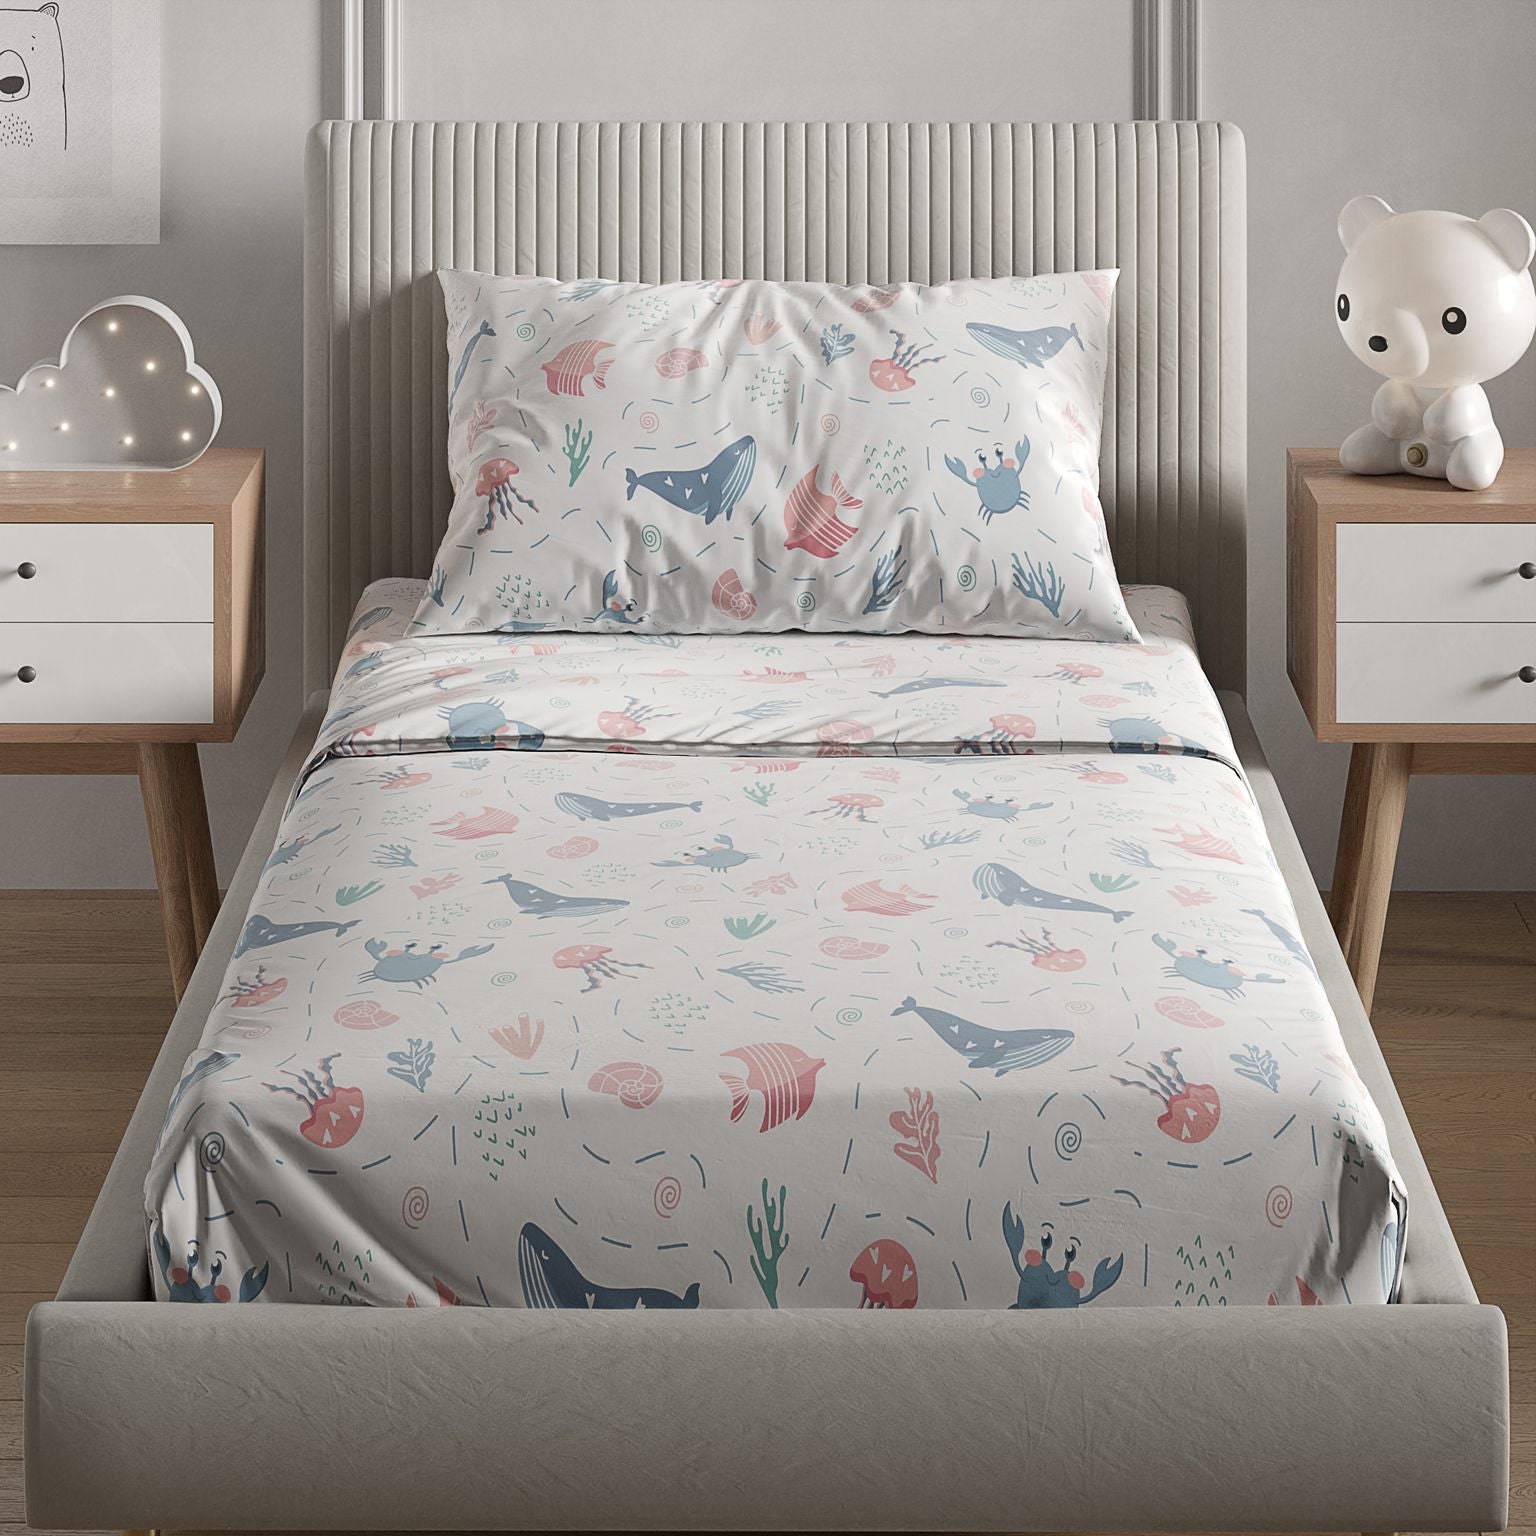 New Kids Sheet Set - Fish and Whales